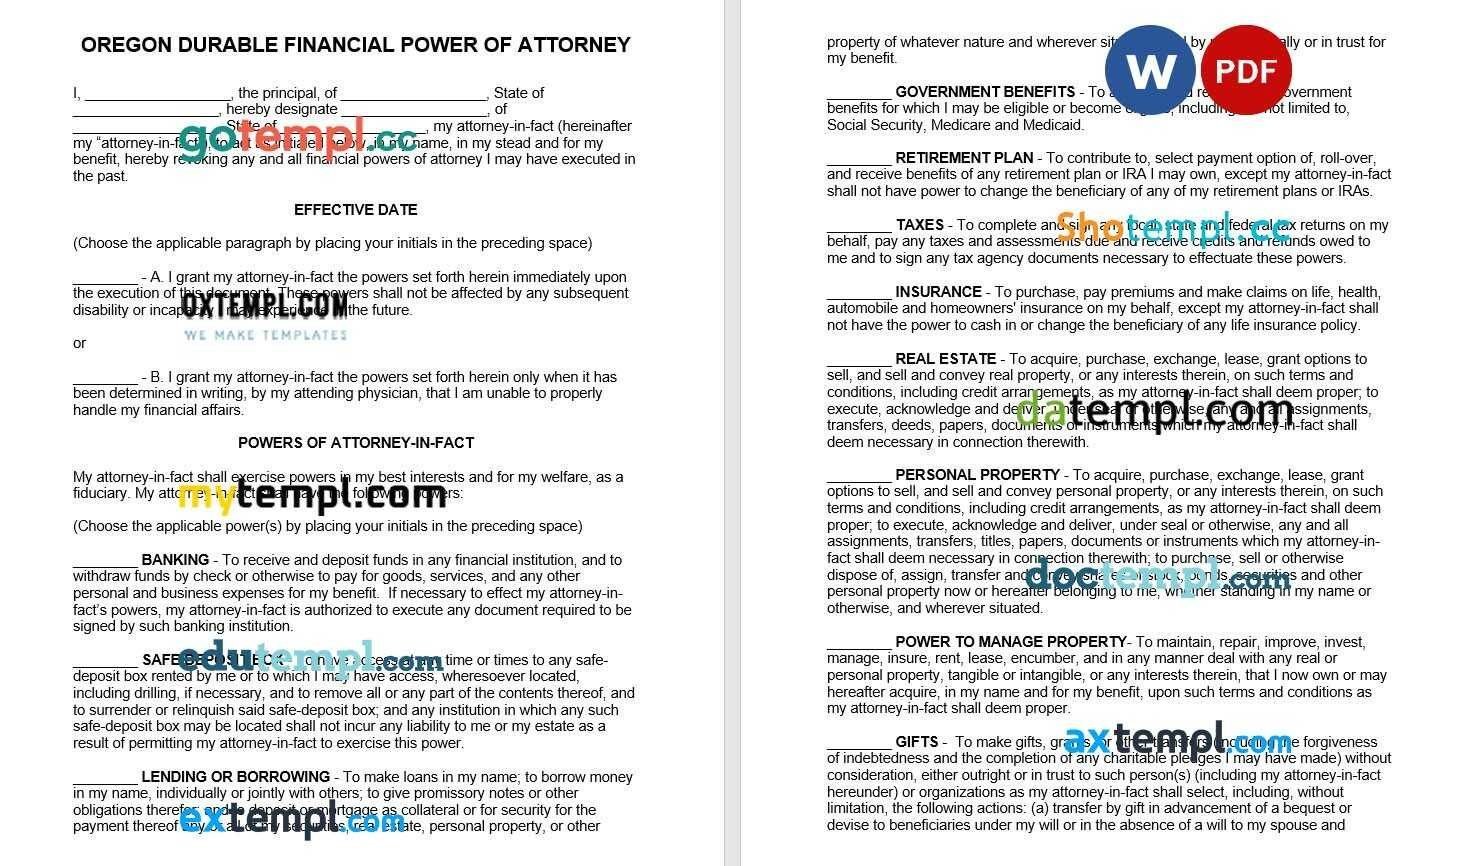 Oregon Durable Financial Power of Attorney Form example, fully editable